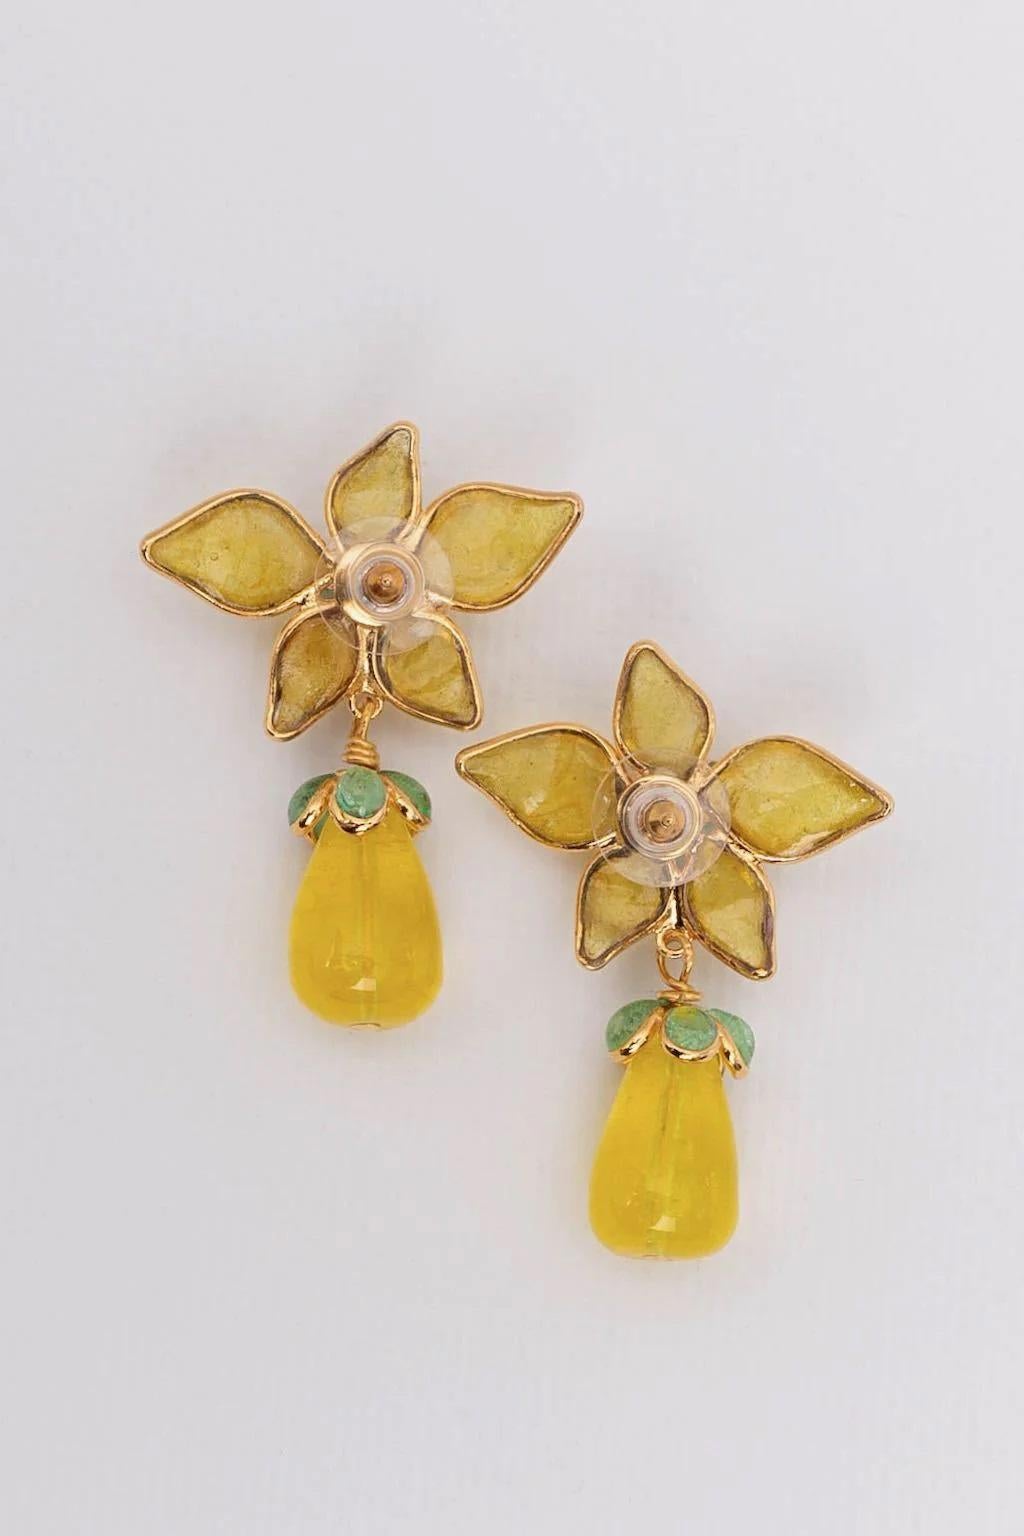 Artist Augustine Flower Gilted Metal Earrings with Yellow Glass Paste For Sale